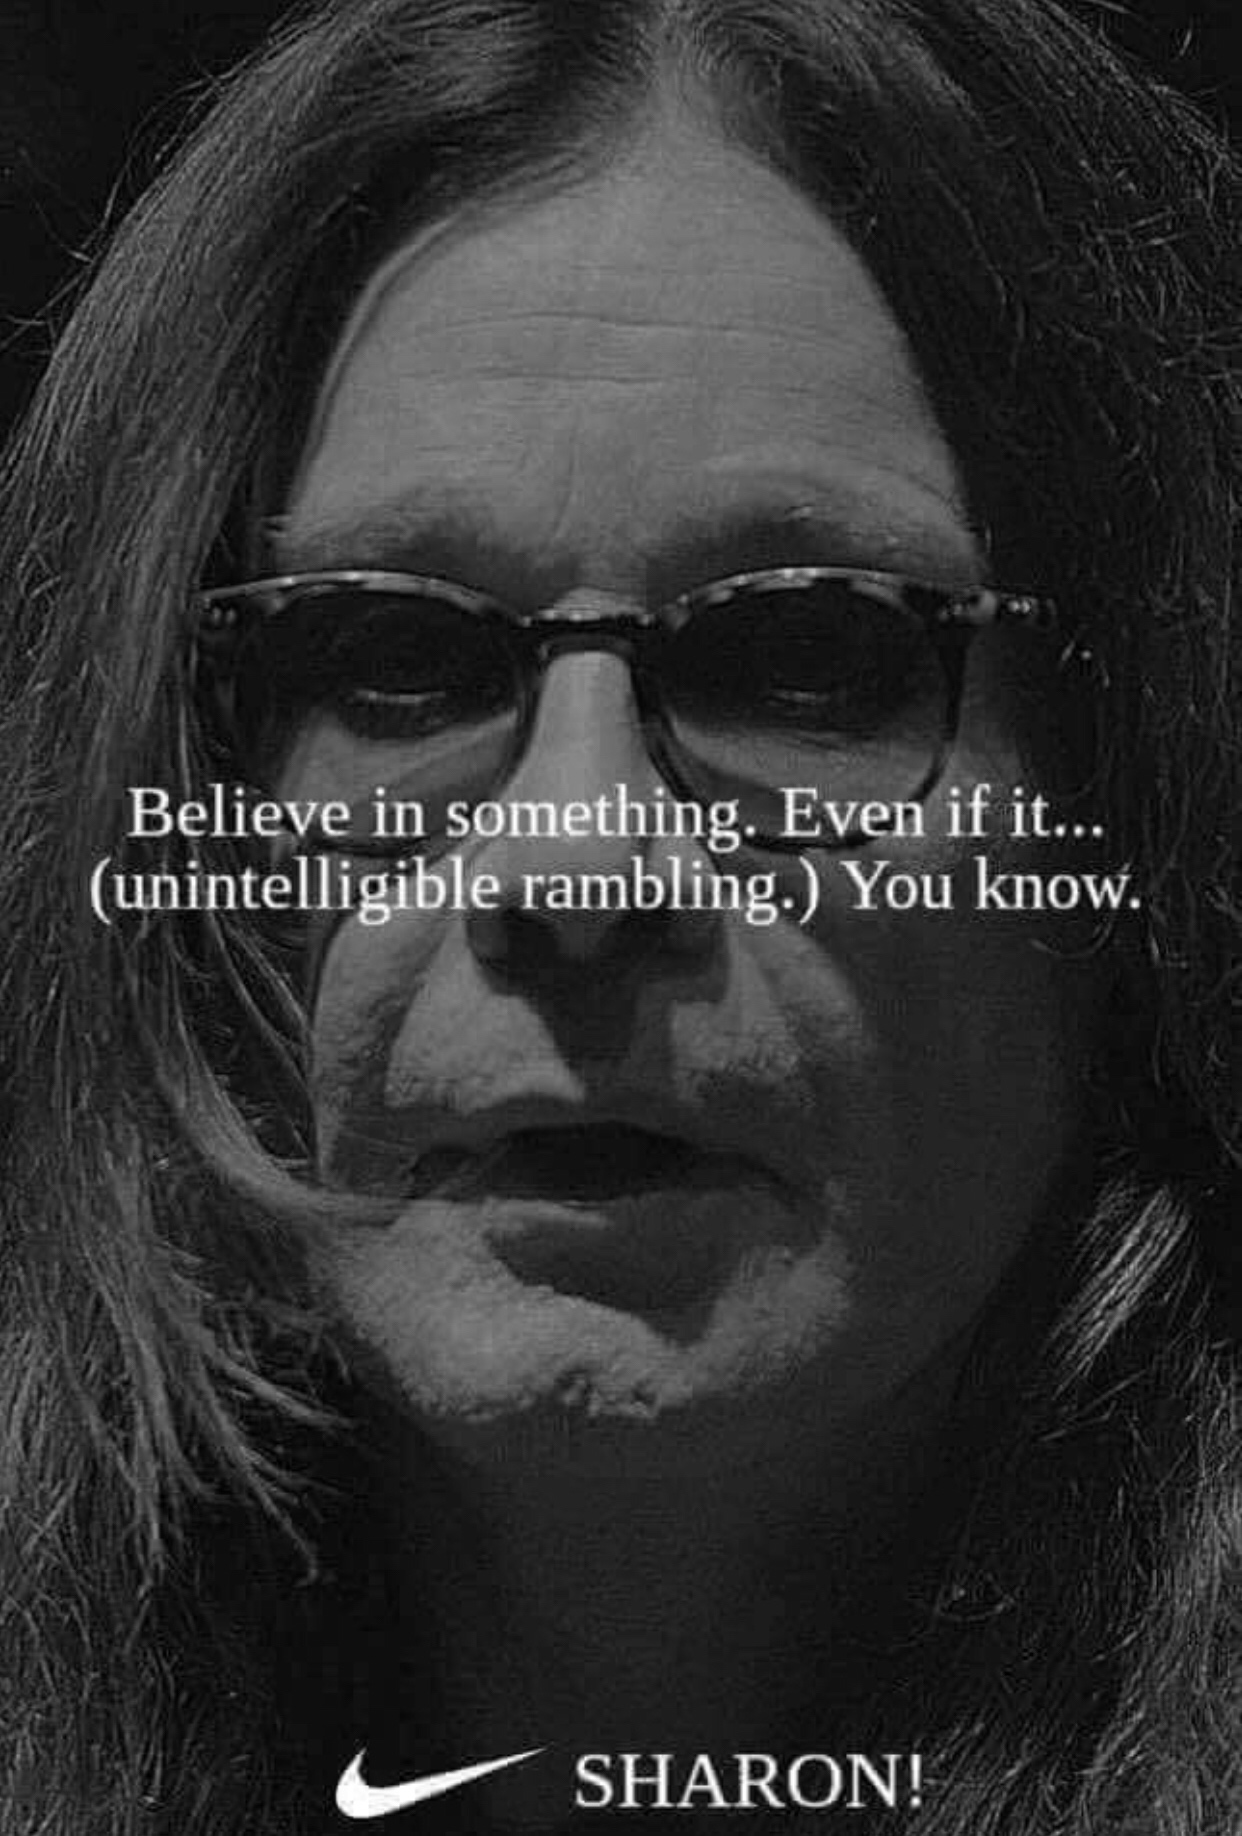 ozzy nike meme - Believe in something. Even if it... unintelligible rambling. You know. Sharon!